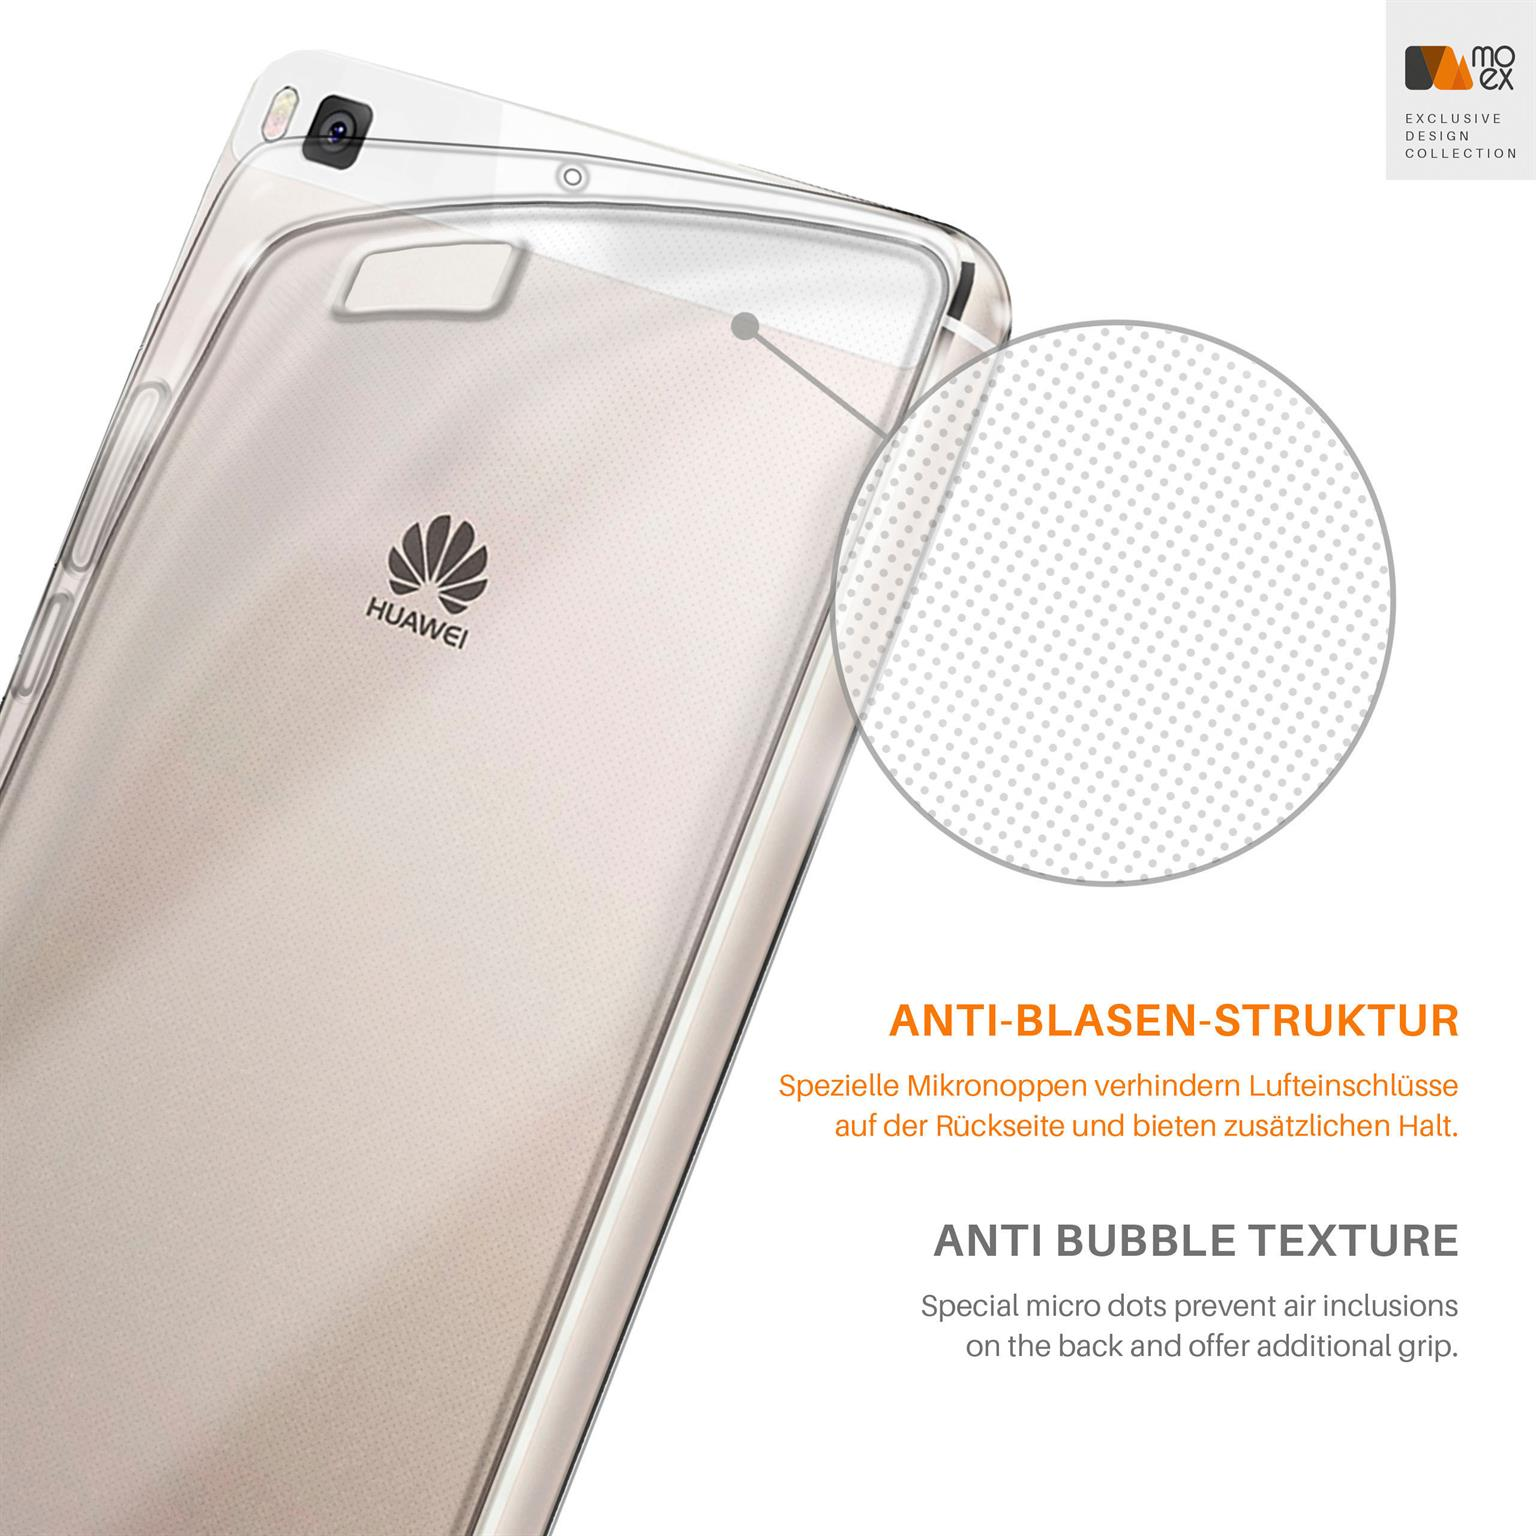 Backcover, P8, MOEX Crystal-Clear Case, Huawei, Aero